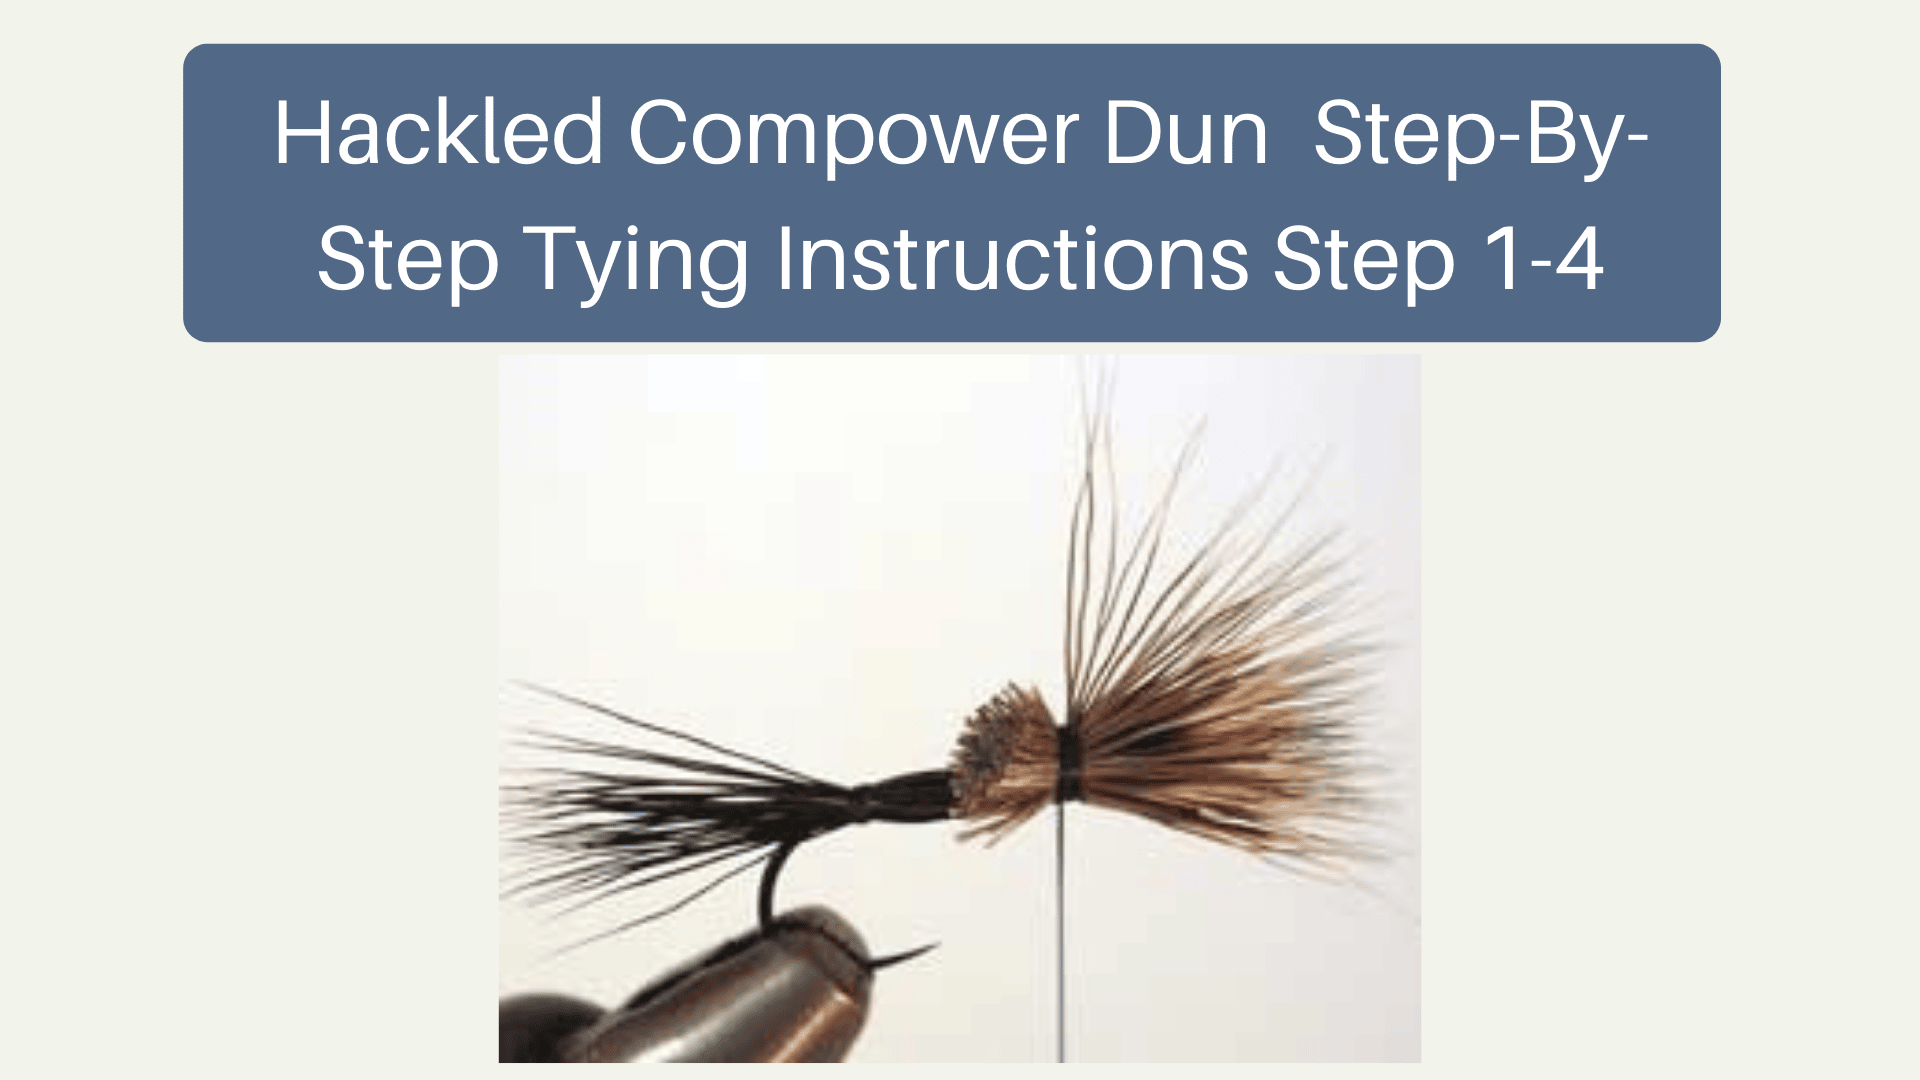 Hackled Compower Dun  Step-By-Step Tying Instructions Step 1-4